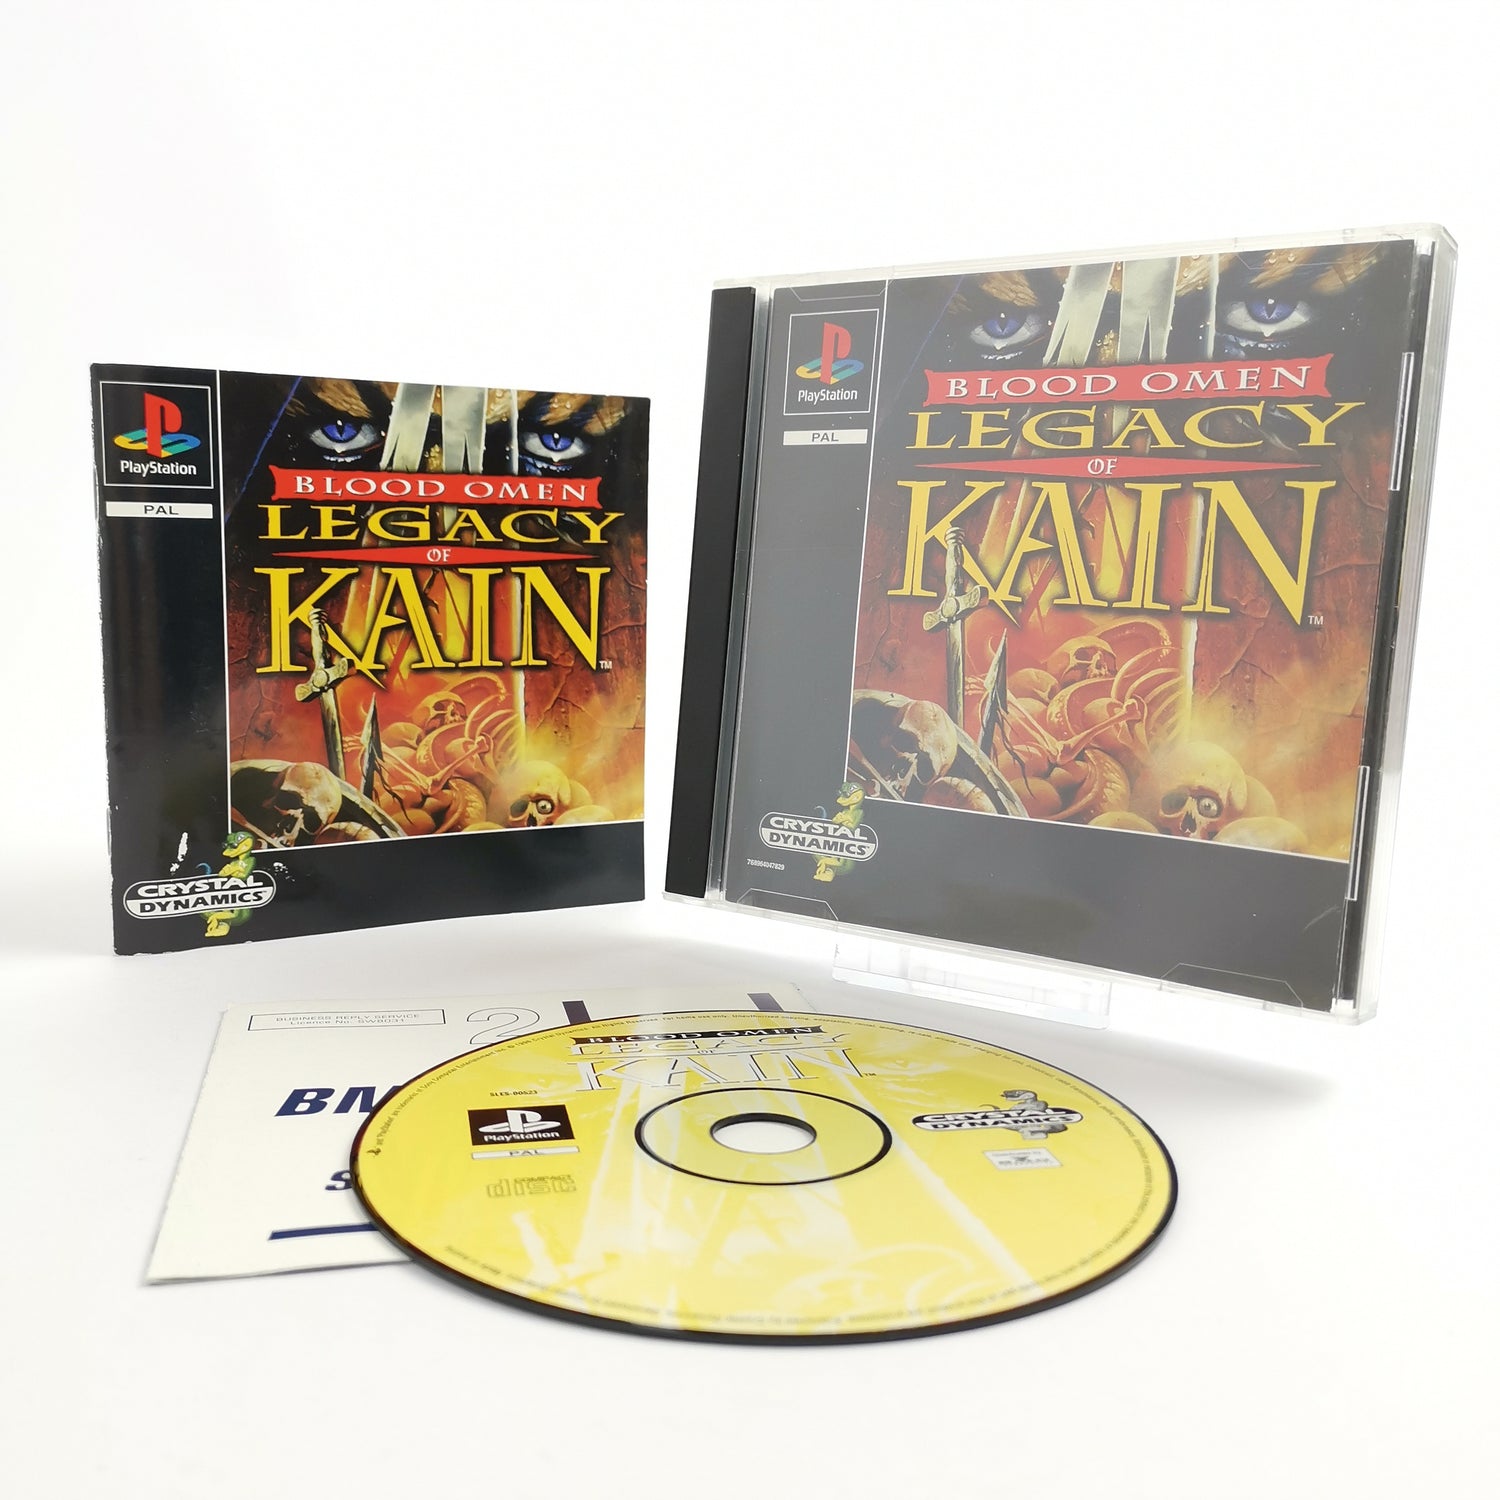 Sony Playstation 1 Game: Blood Omen Legacy of Kain | PS1 PSX - OVP PAL